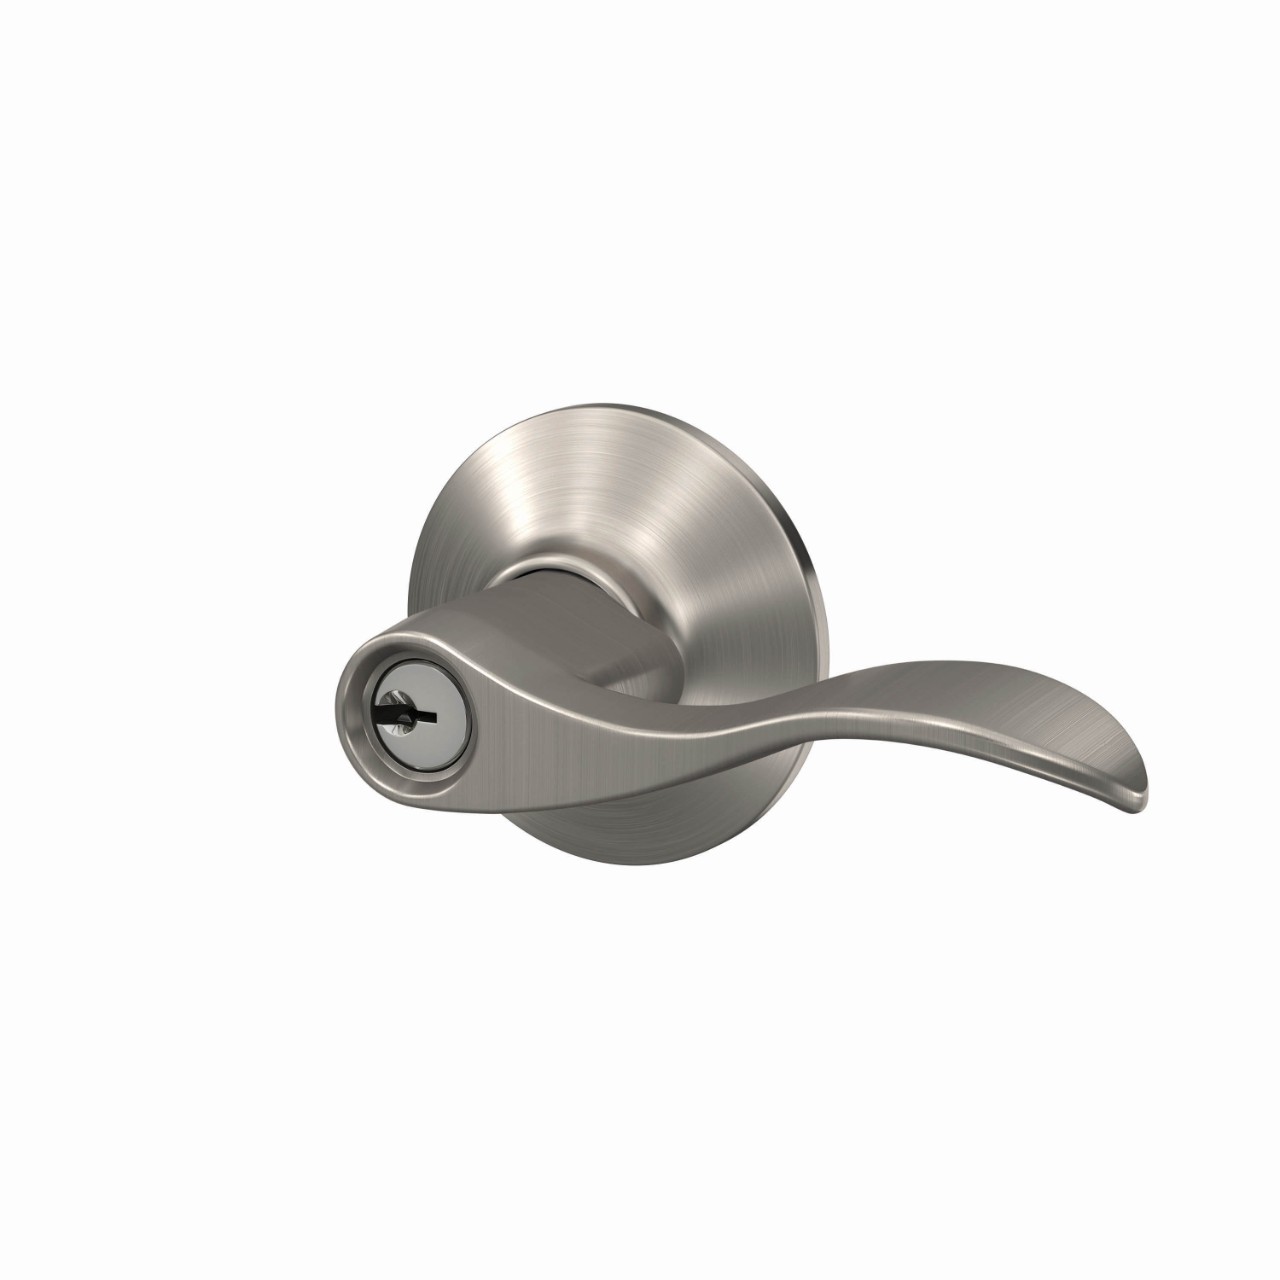 Accent Lever Keyed Entry Lock